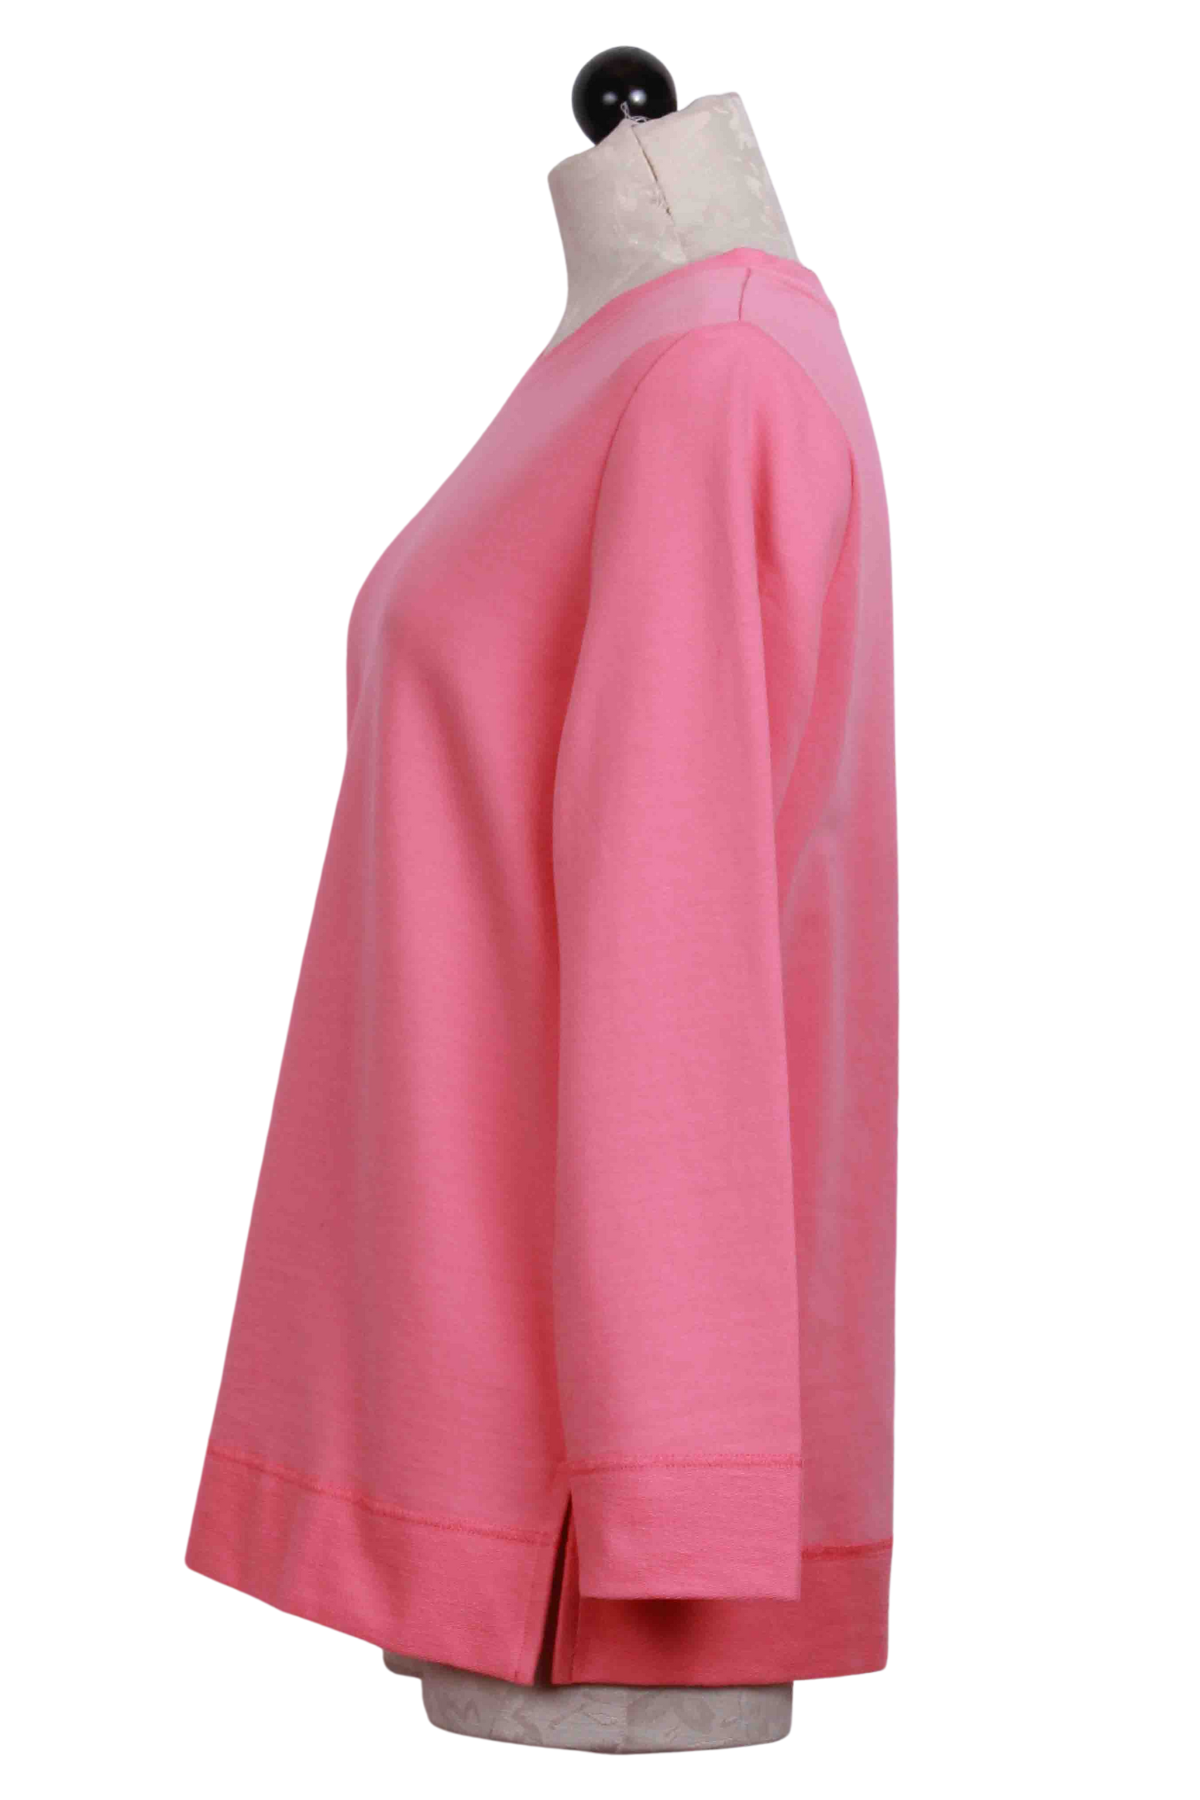 side view of Guava Terry Band Pullover from Escape by Habitat